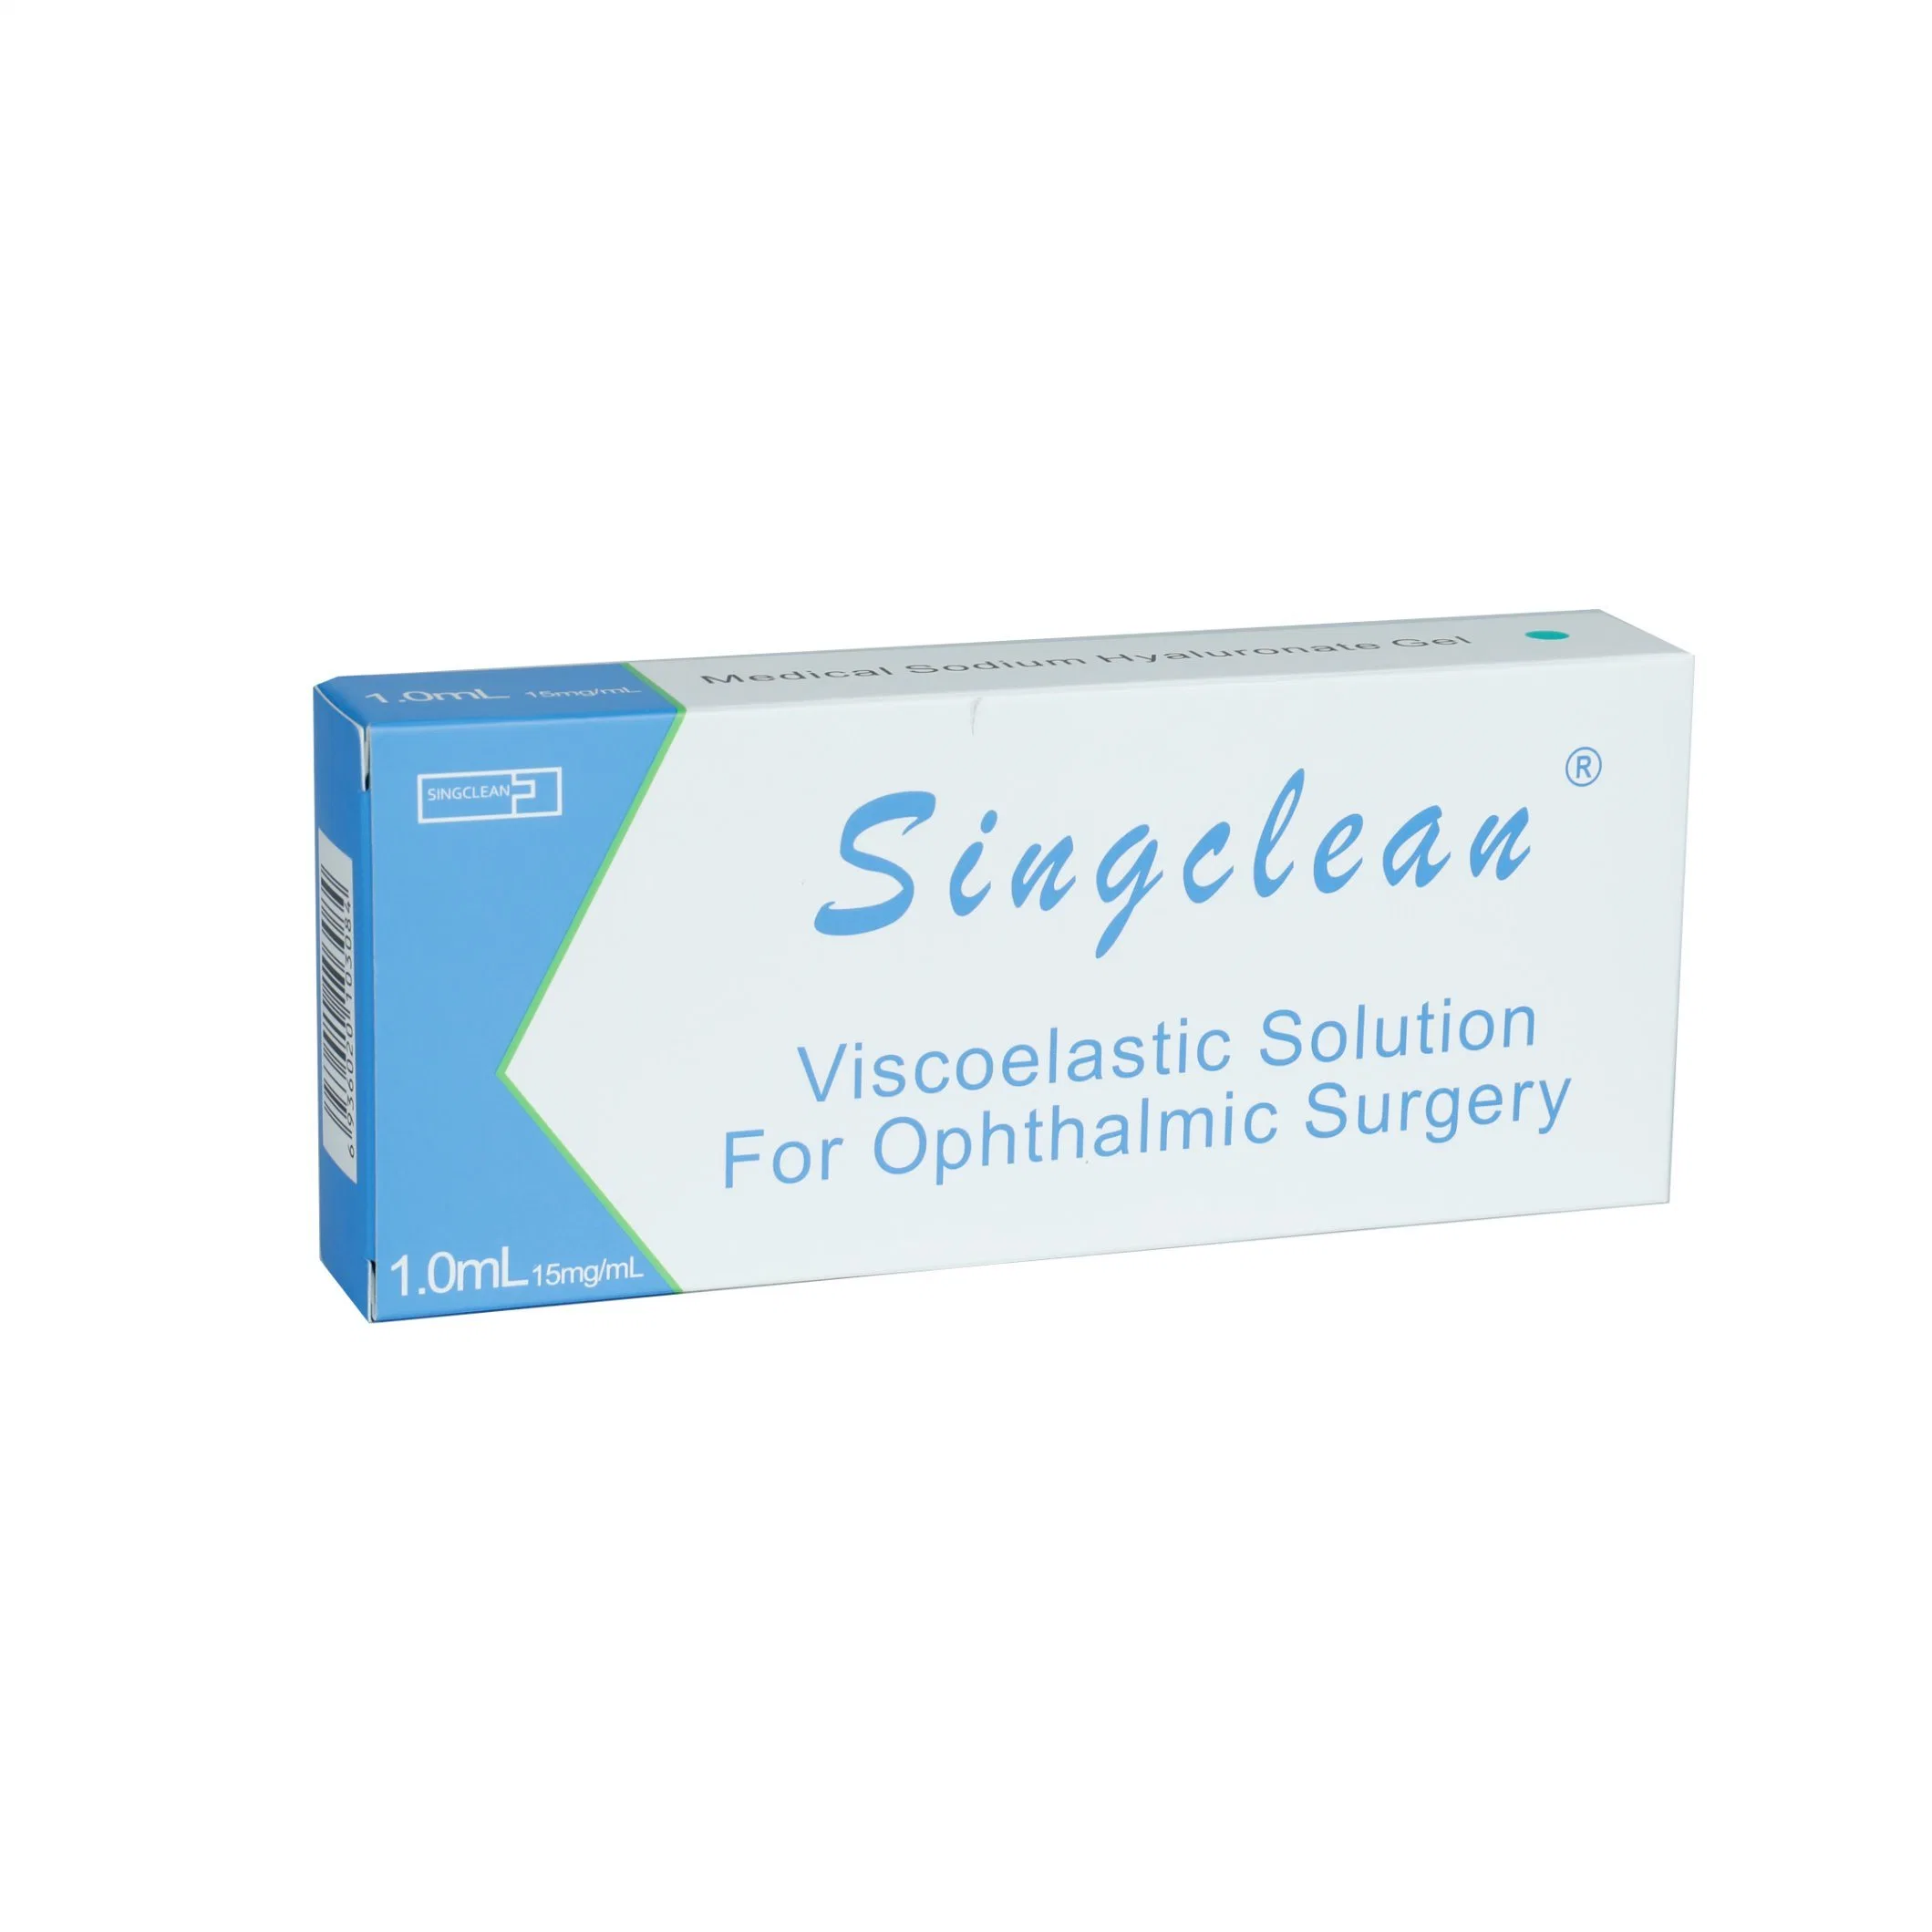 15mg/Ml Human Singclean Ha Viscoelastic for Surgery Ophthalmic Viscosurgical Device